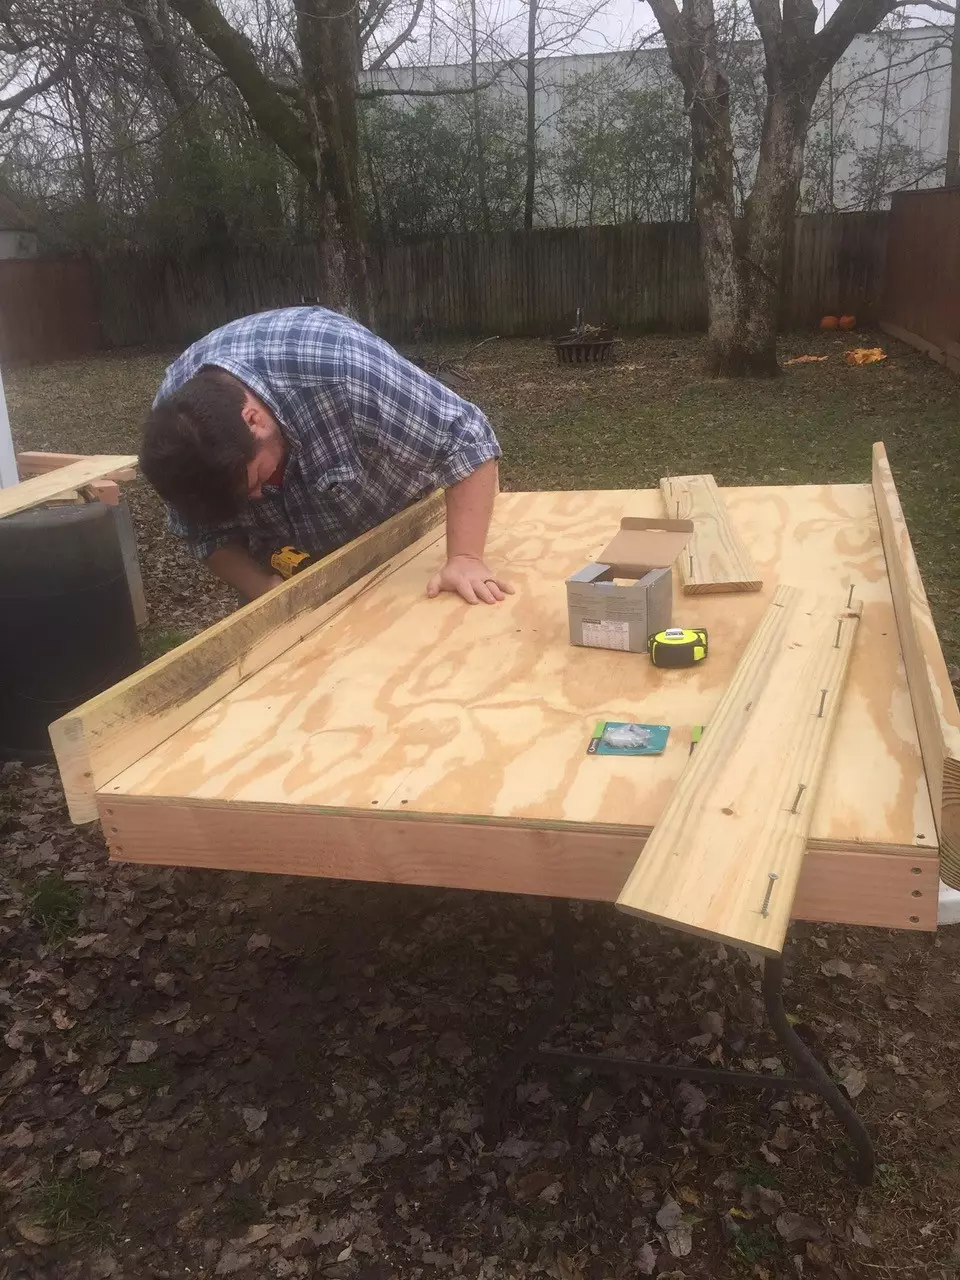 Jim constructed the bed from scratch (